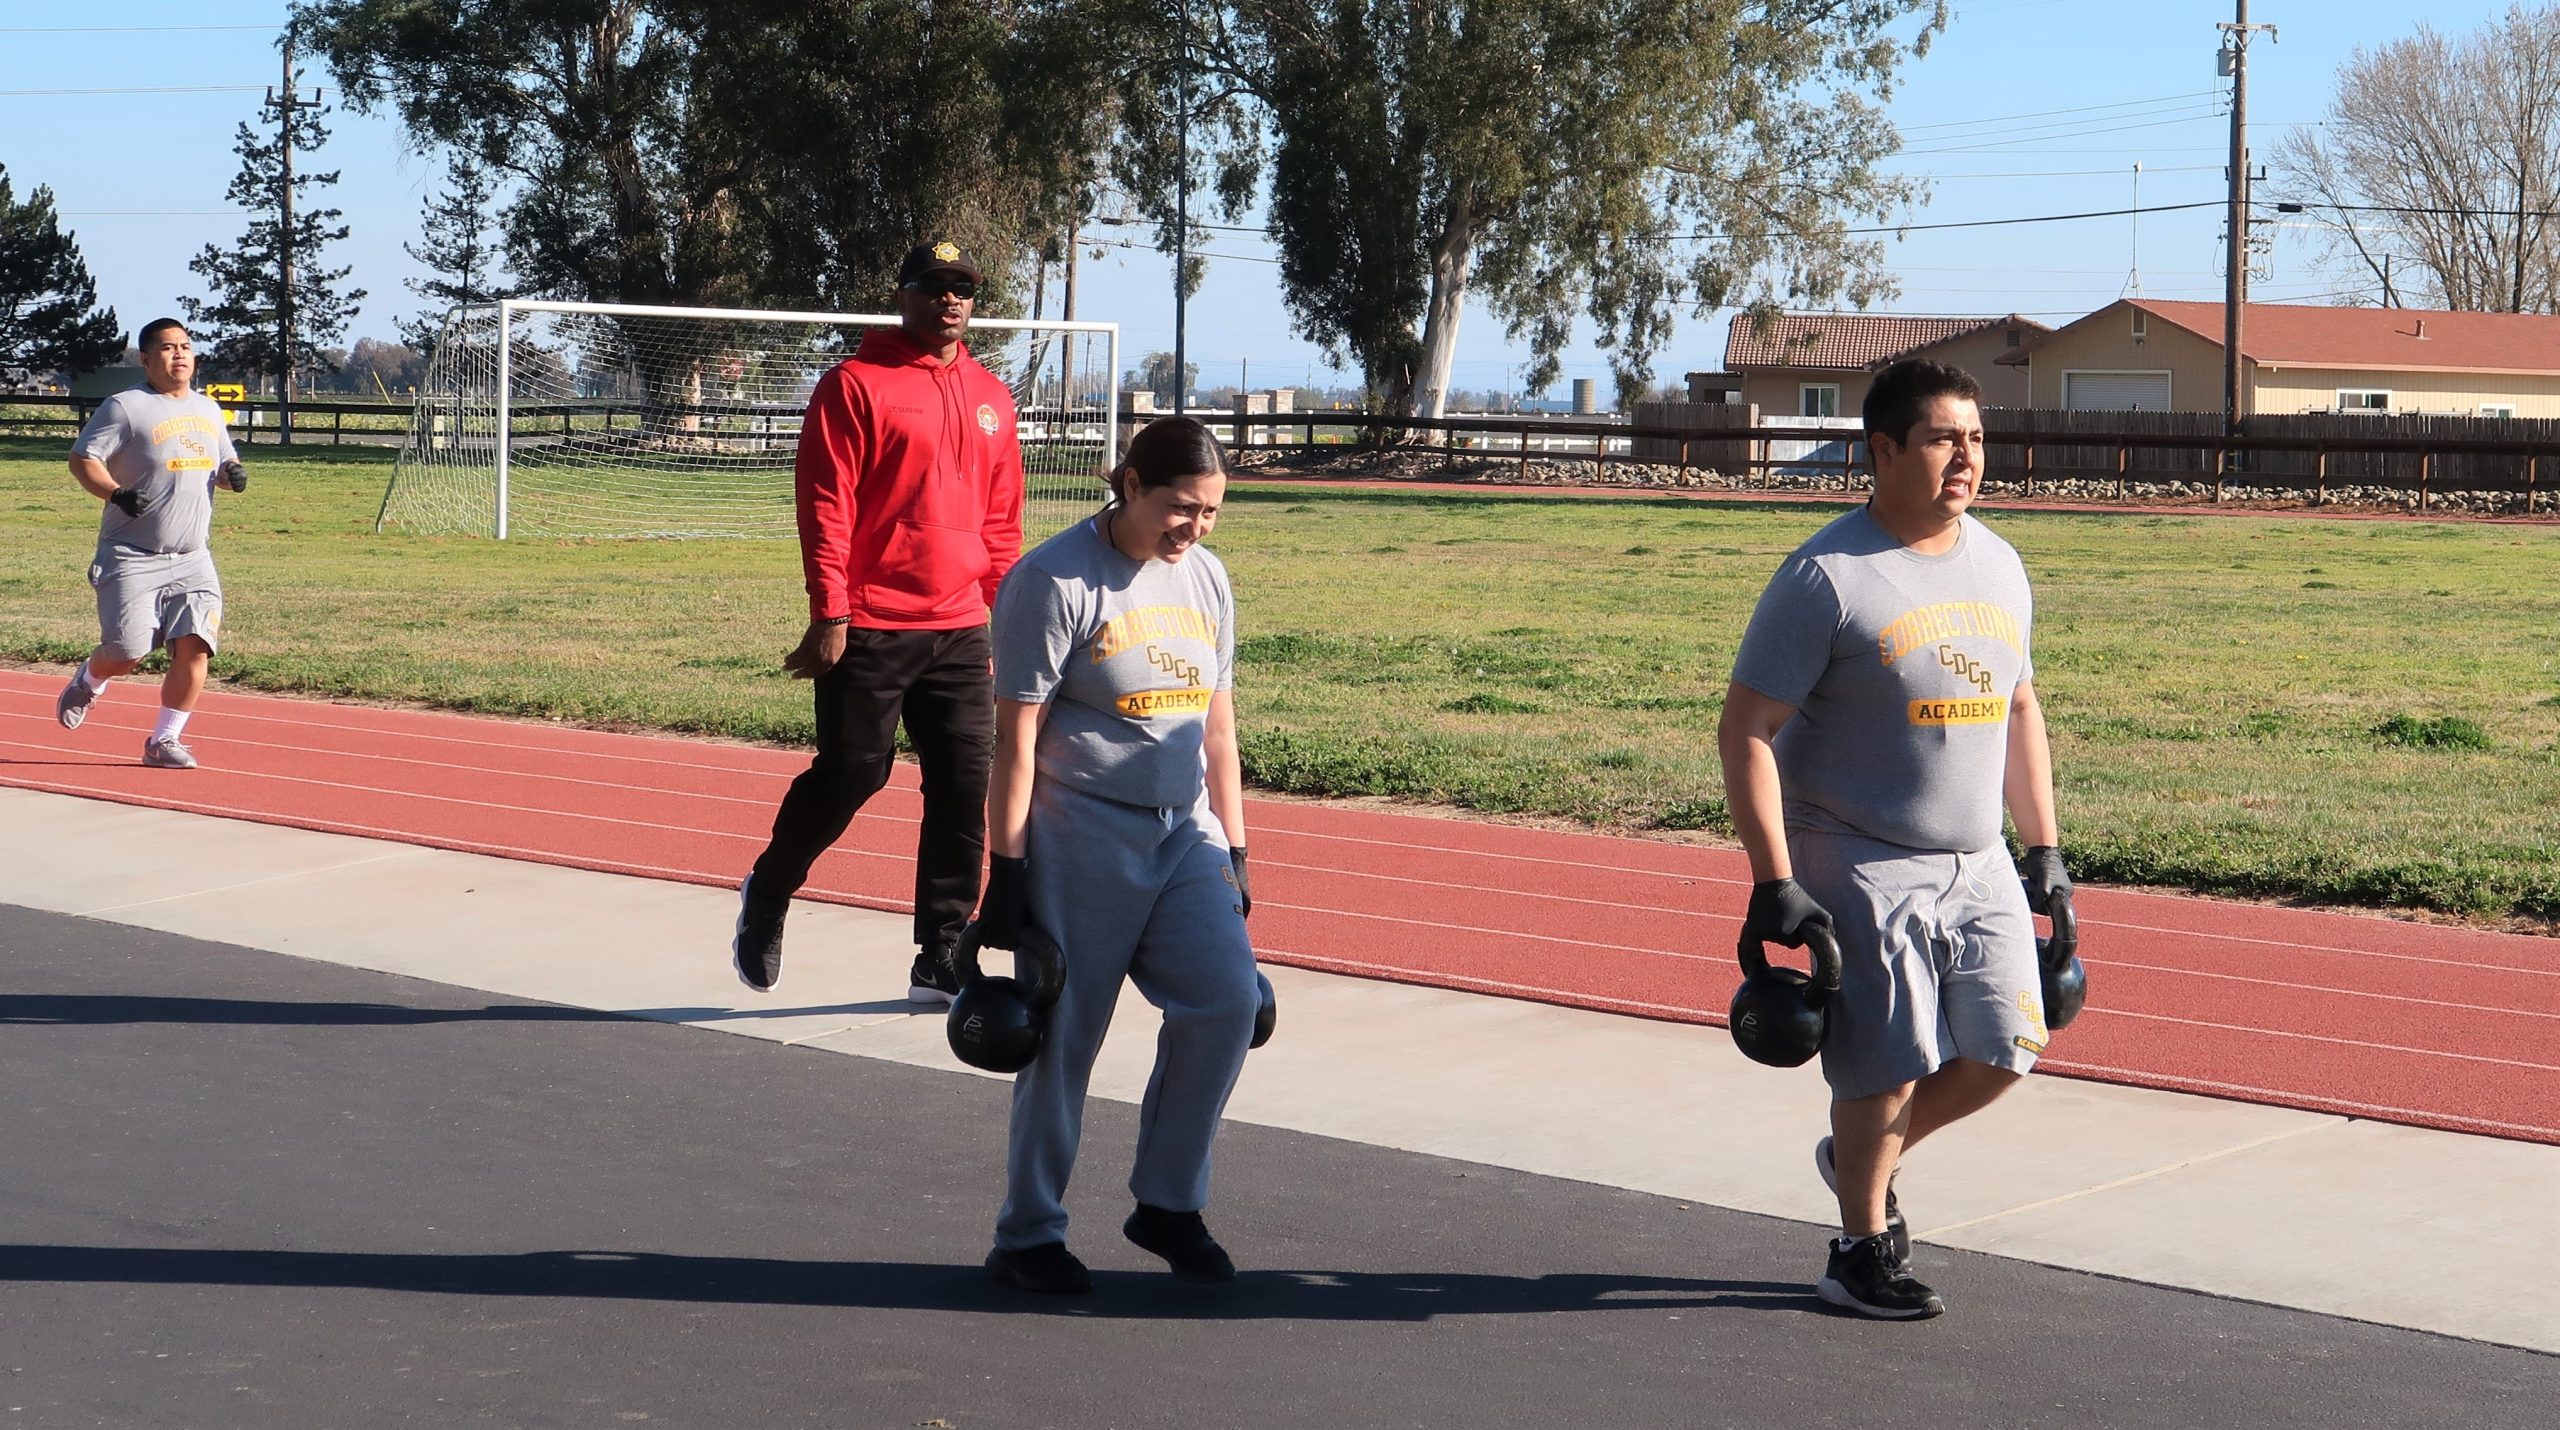 Two cadets carry weights and others run a track while a sergeant watches.